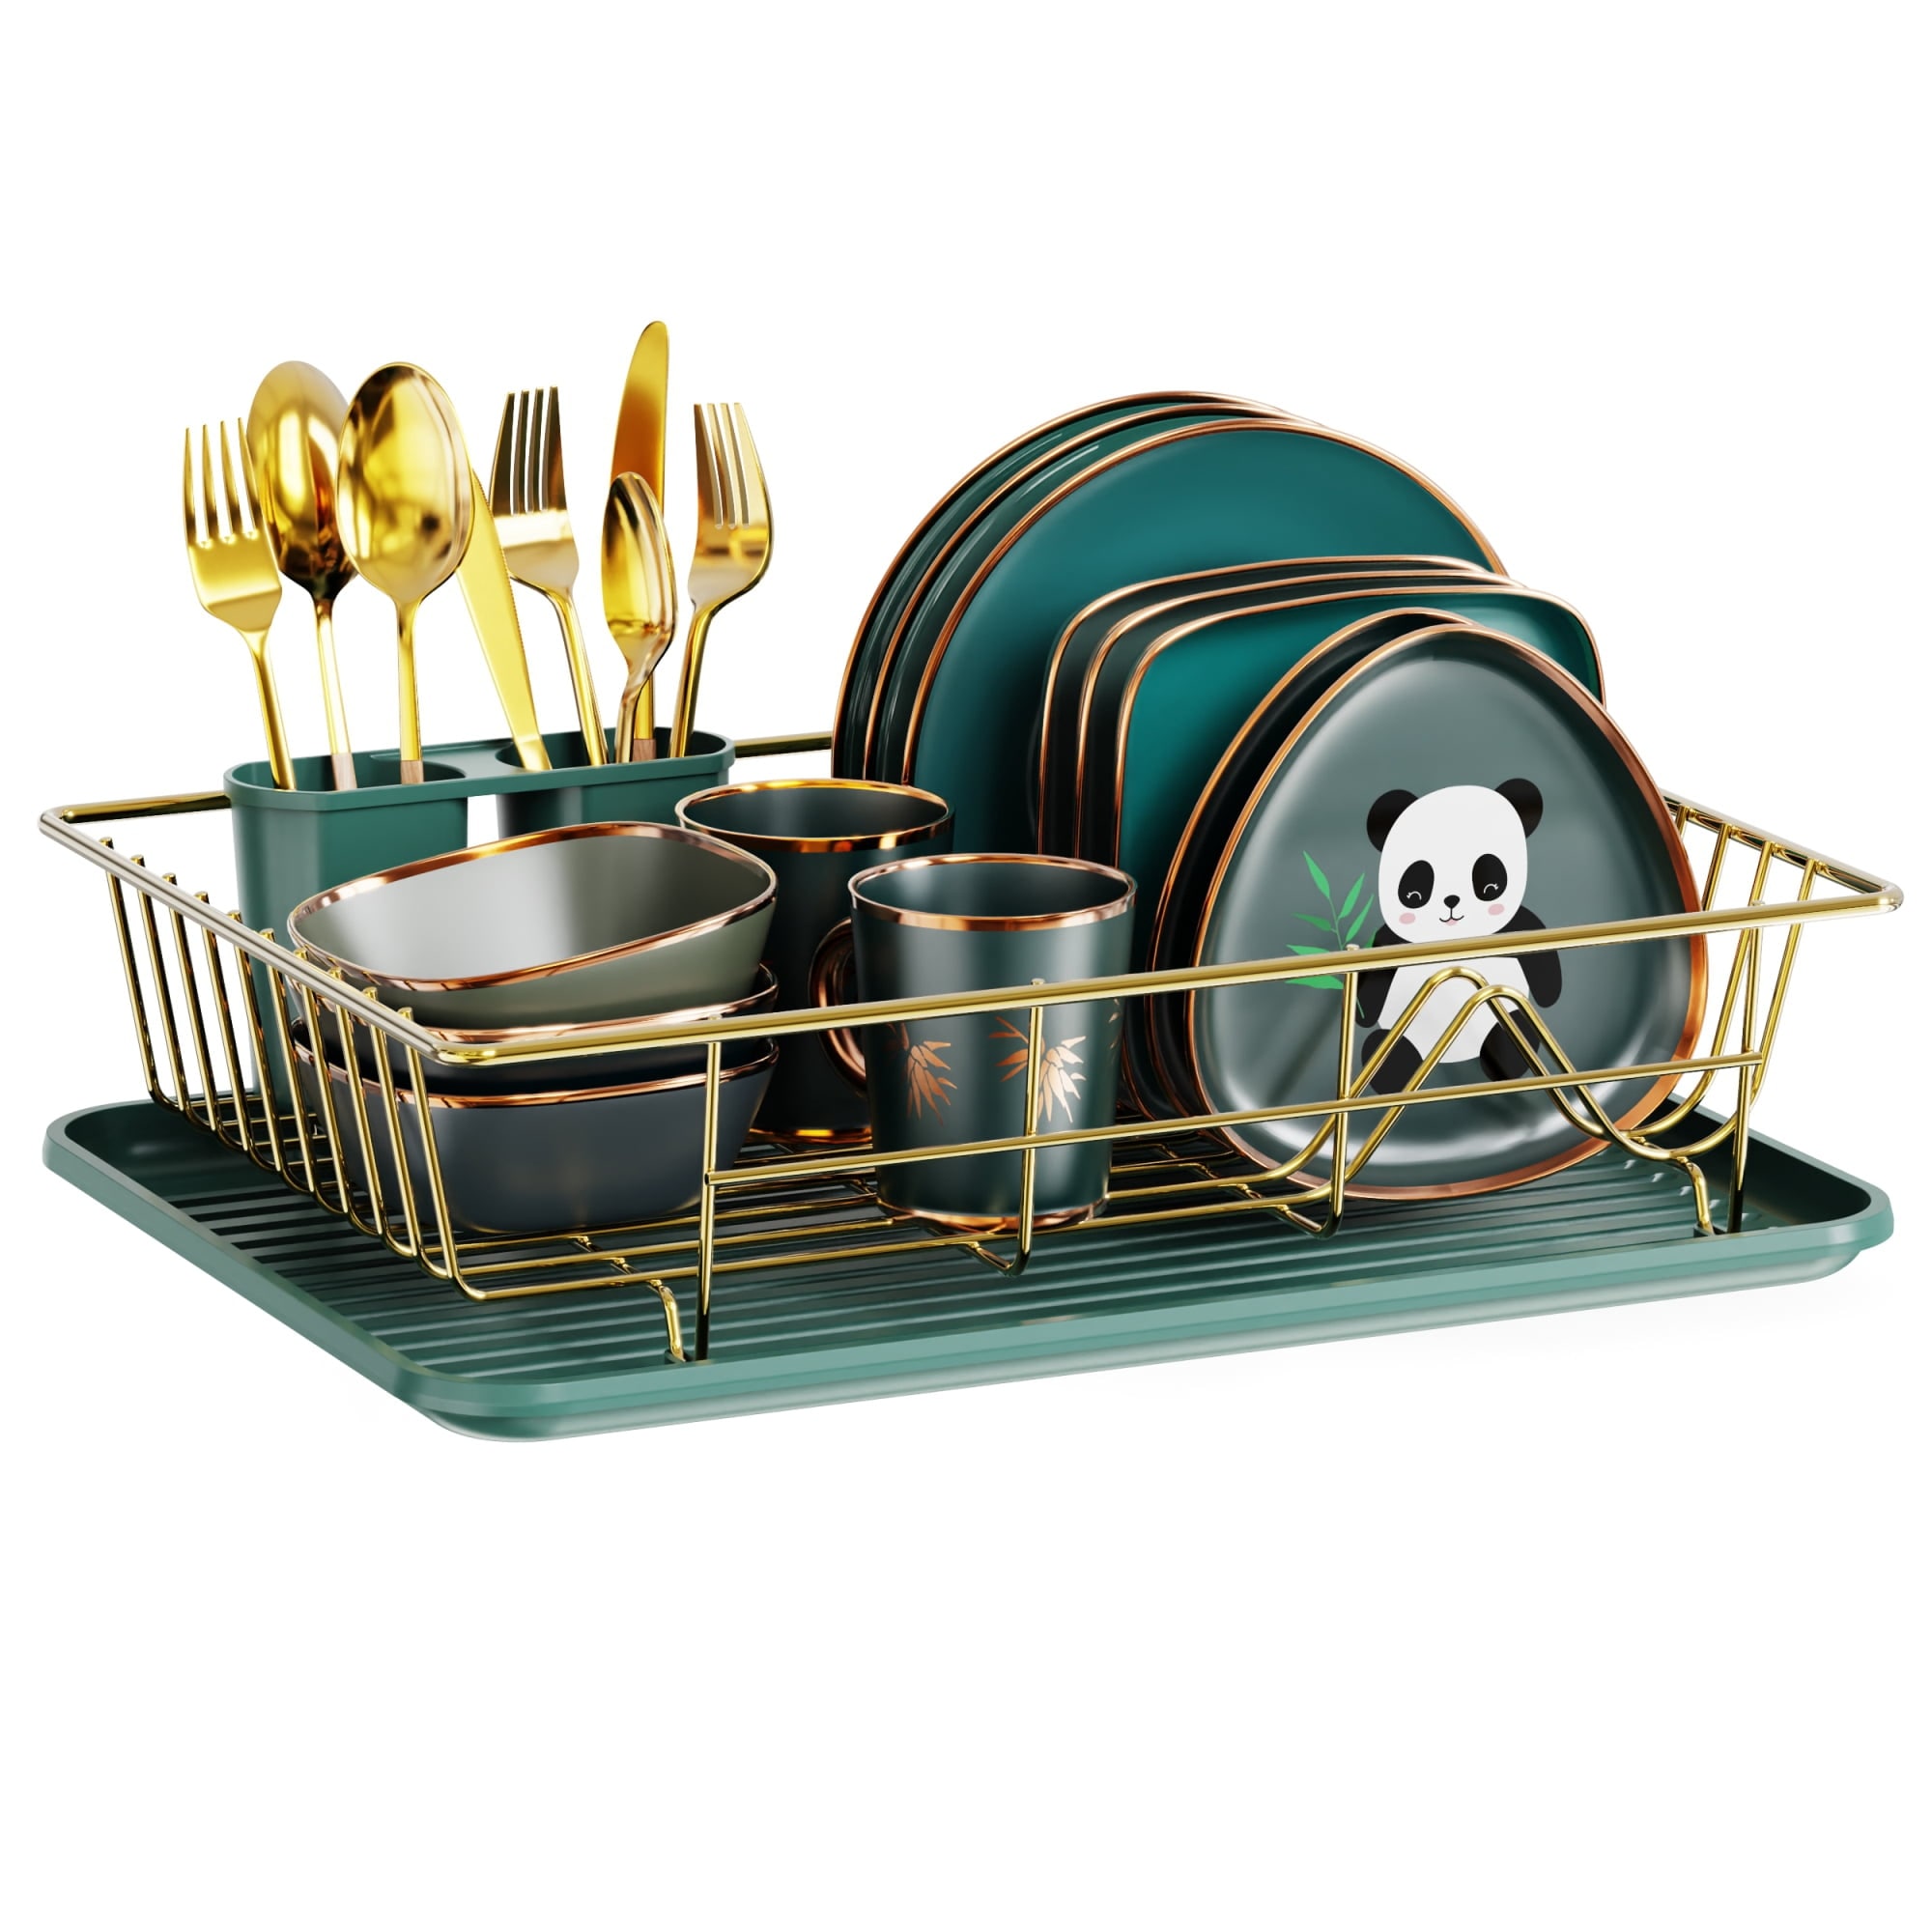 https://ak1.ostkcdn.com/images/products/is/images/direct/aceec7298b6f0a2291bdf99de1a4917b19dfb189/Dish-Drying-Rack%2CDish-Drainer-with-Tray-Utensil-Black-Golden.jpg